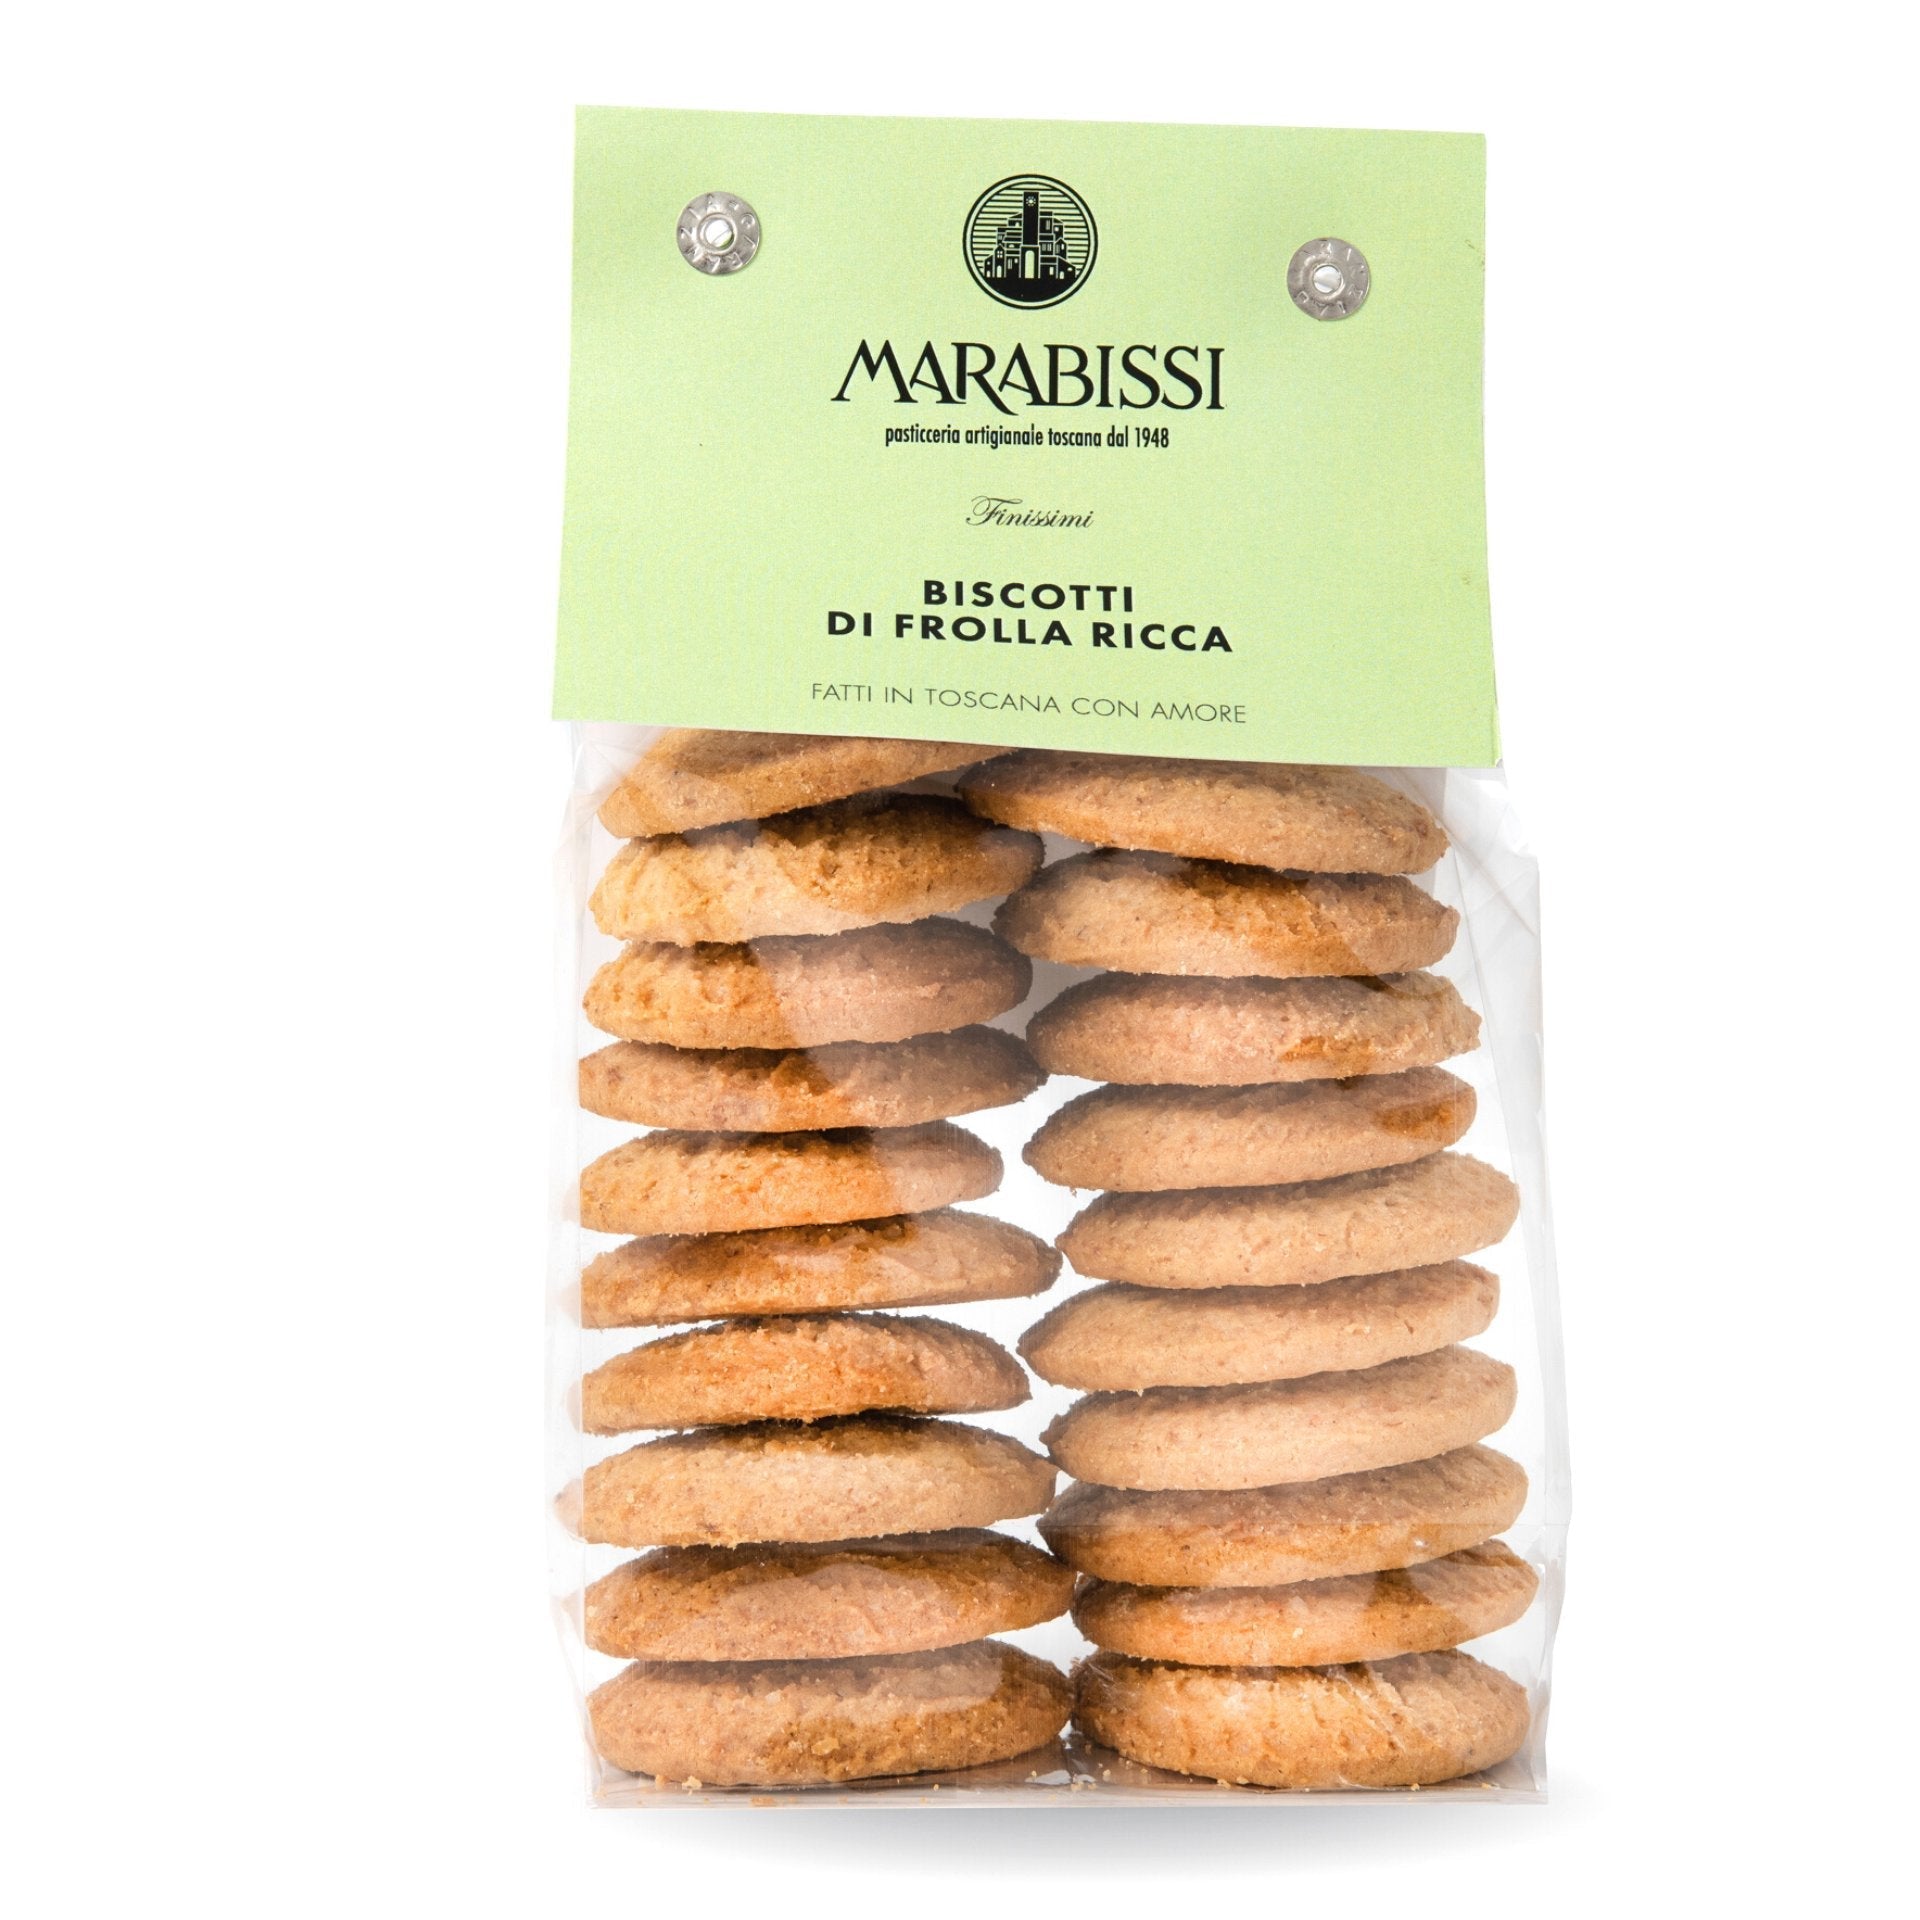 Marabissi Butter Artisan Biscuits (Bag) 200g  | Imported and distributed in the UK by Just Gourmet Foods